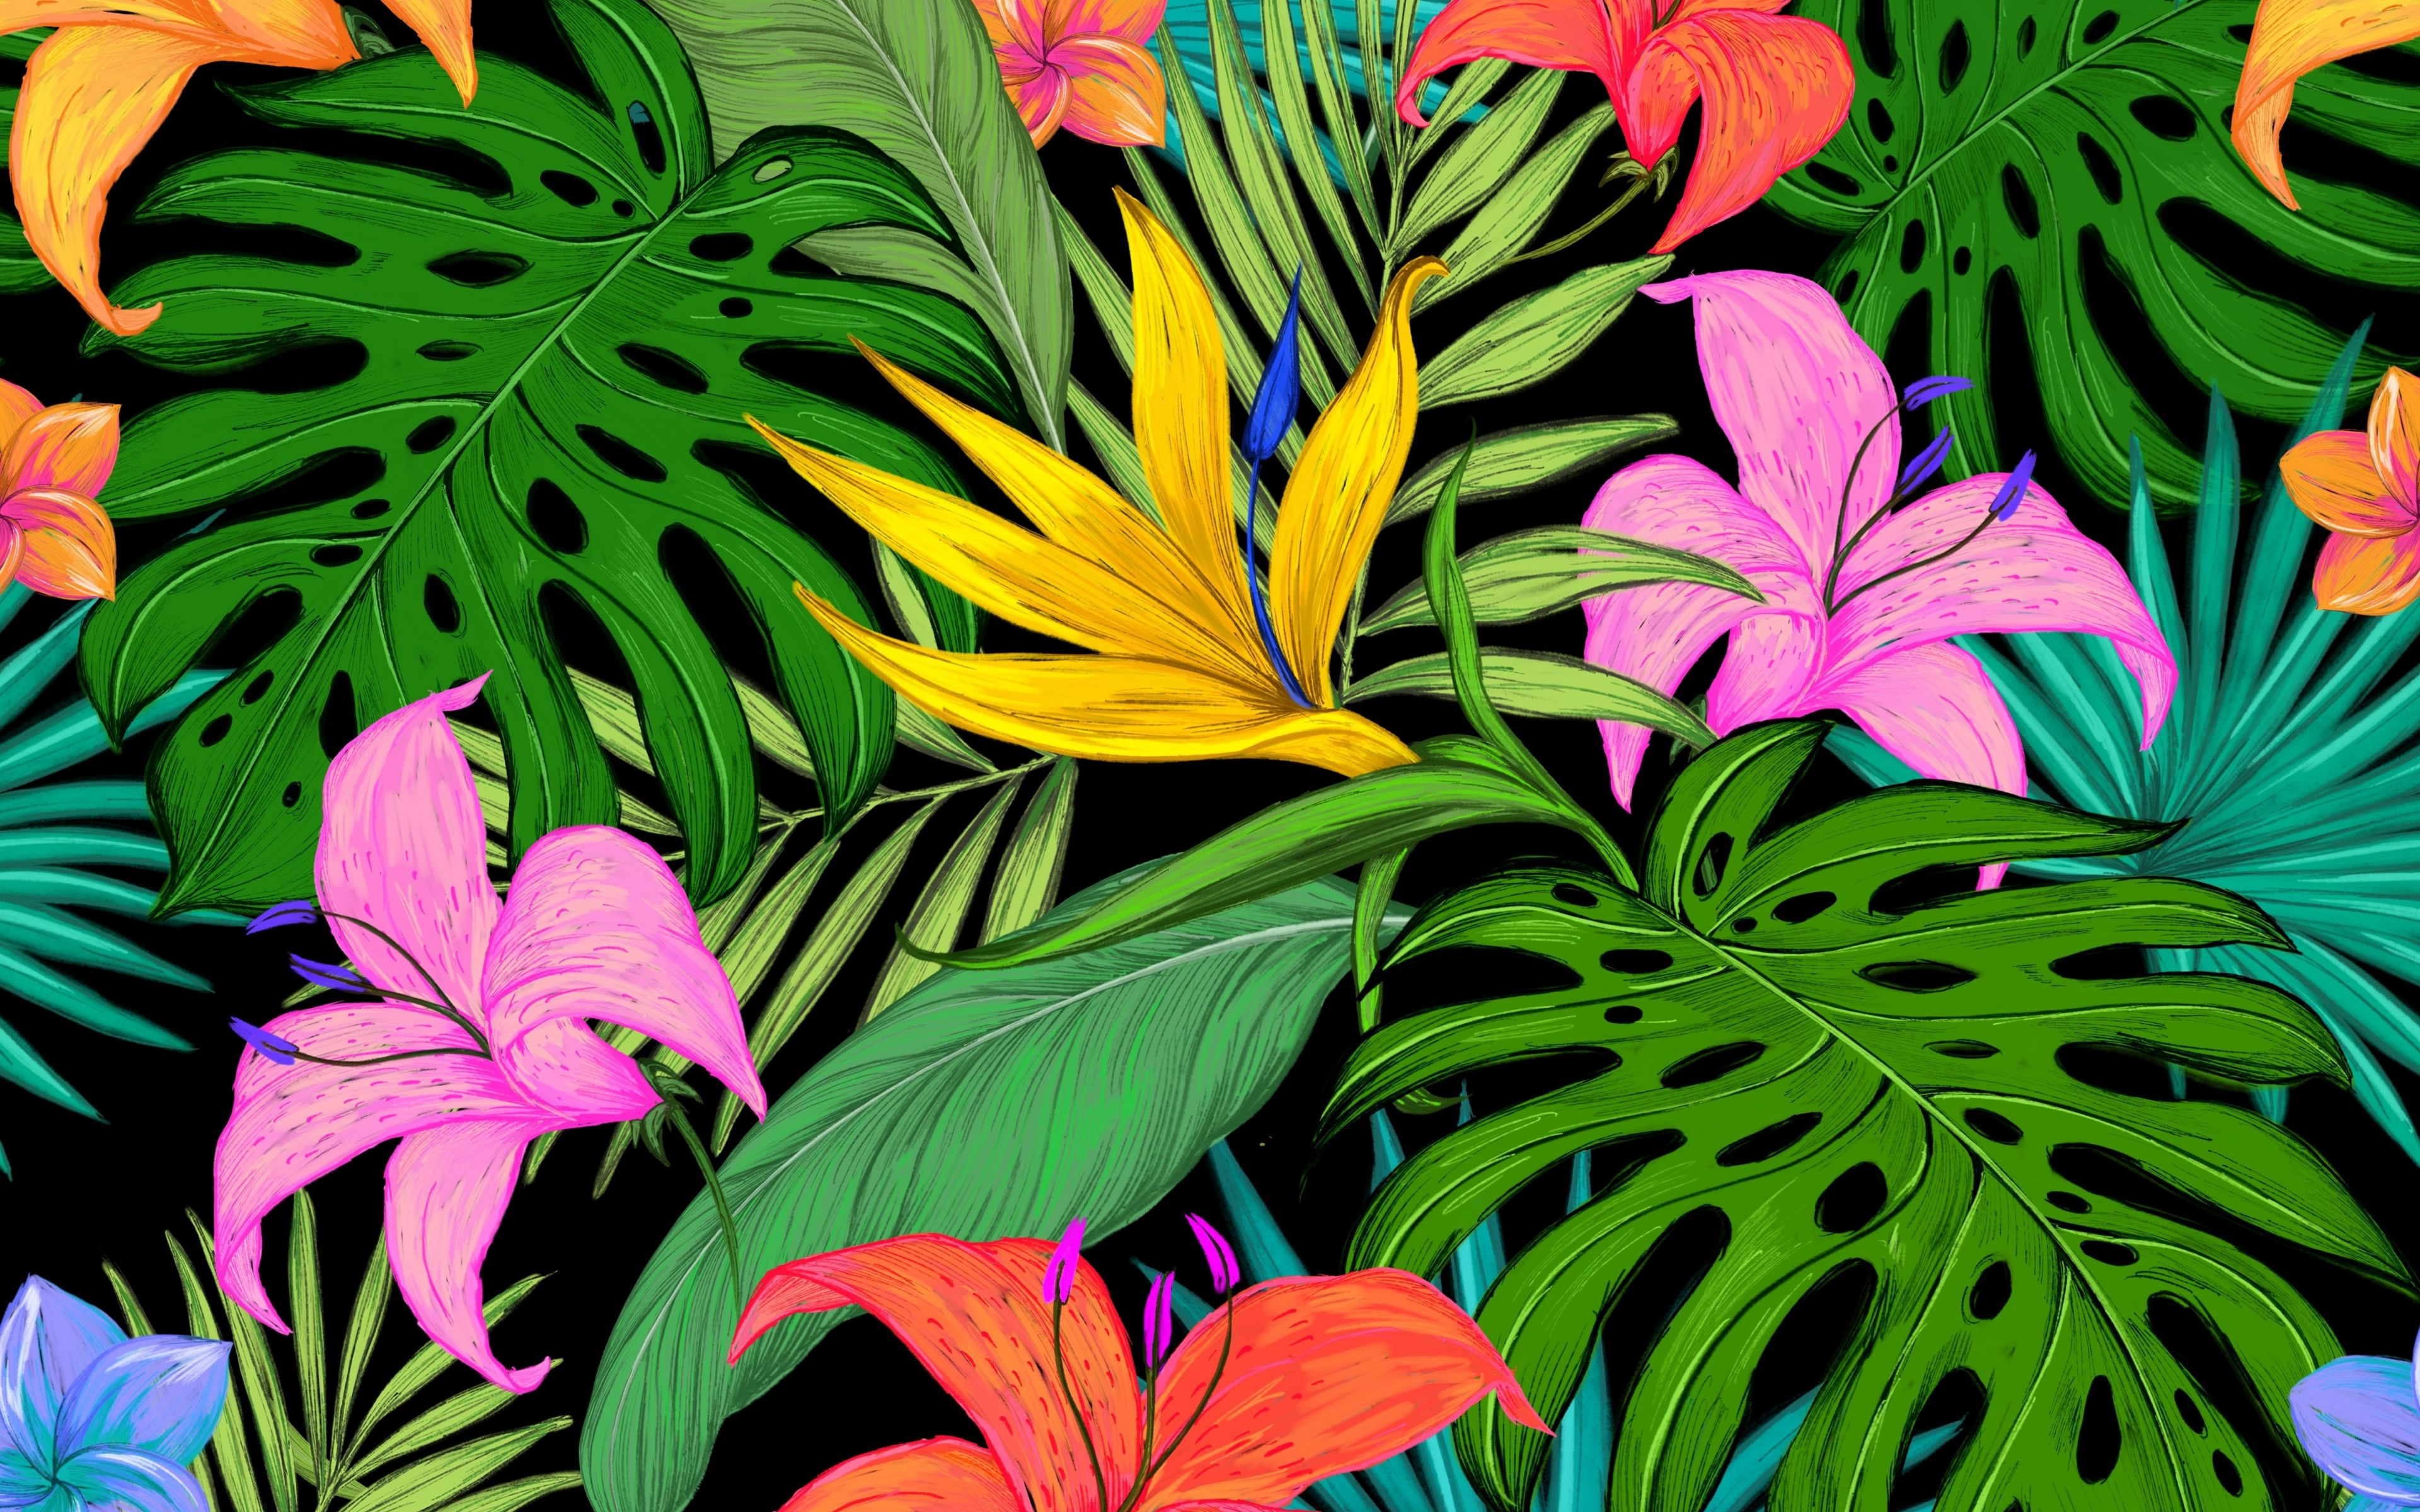 Download 3840x2400 wallpaper pattern, tropical, flowers, leaves, 4k, ultra HD 16: widescreen, 3840x2400 HD image, background, 16259